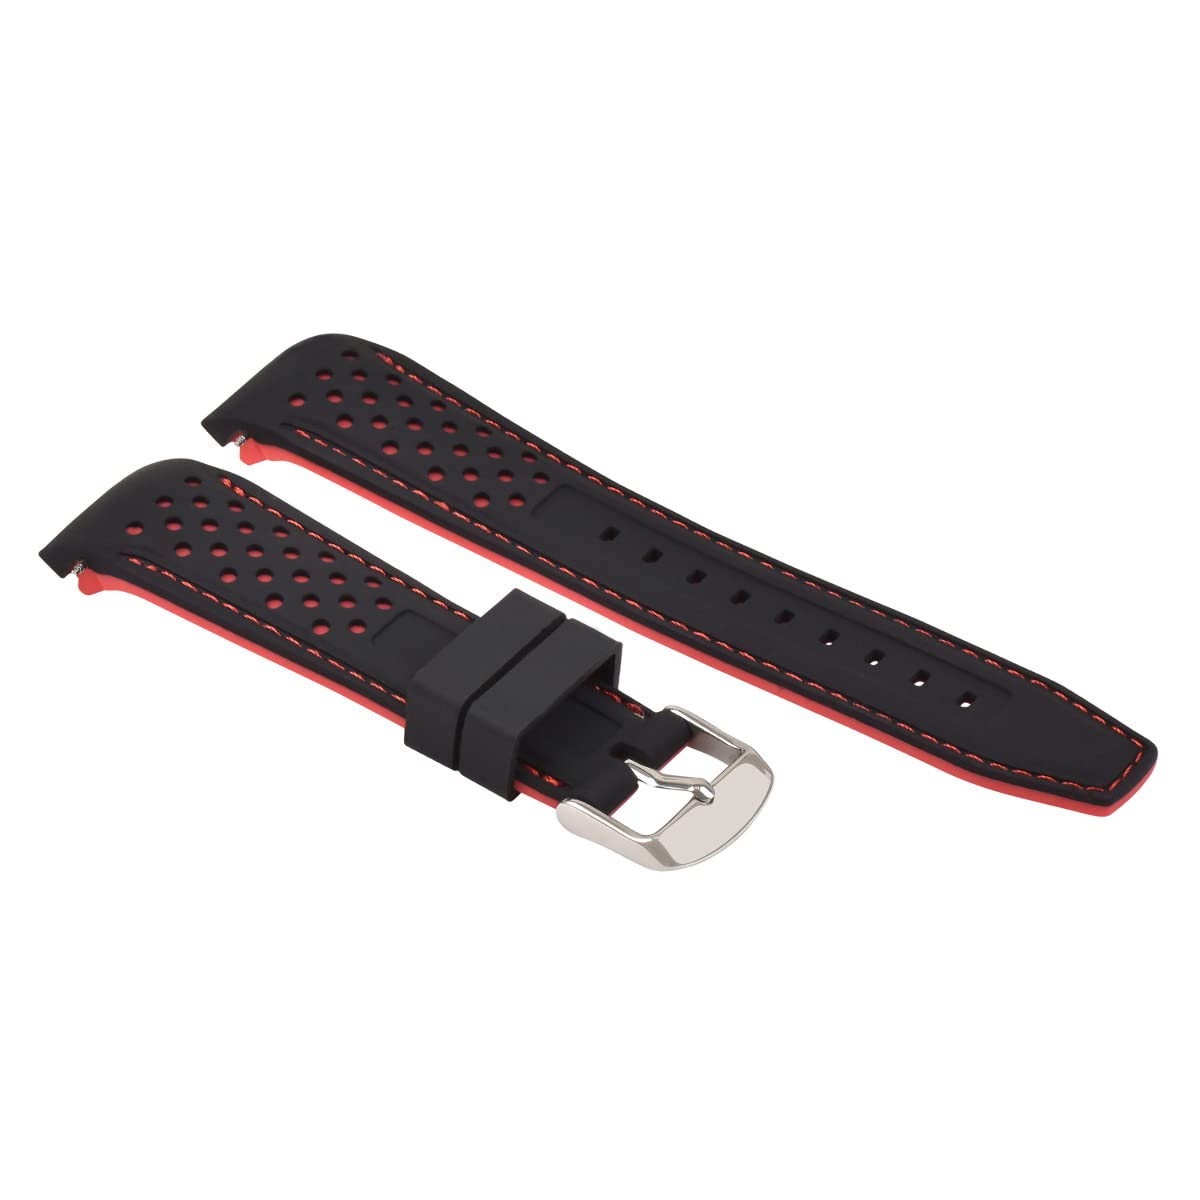 Ewatchparts 20MM CURVED RUBBER STRAP PERFORATED COMPATIBLE WITH CITIZEN ECO DRIVE WATCH BLACK RED STITCH